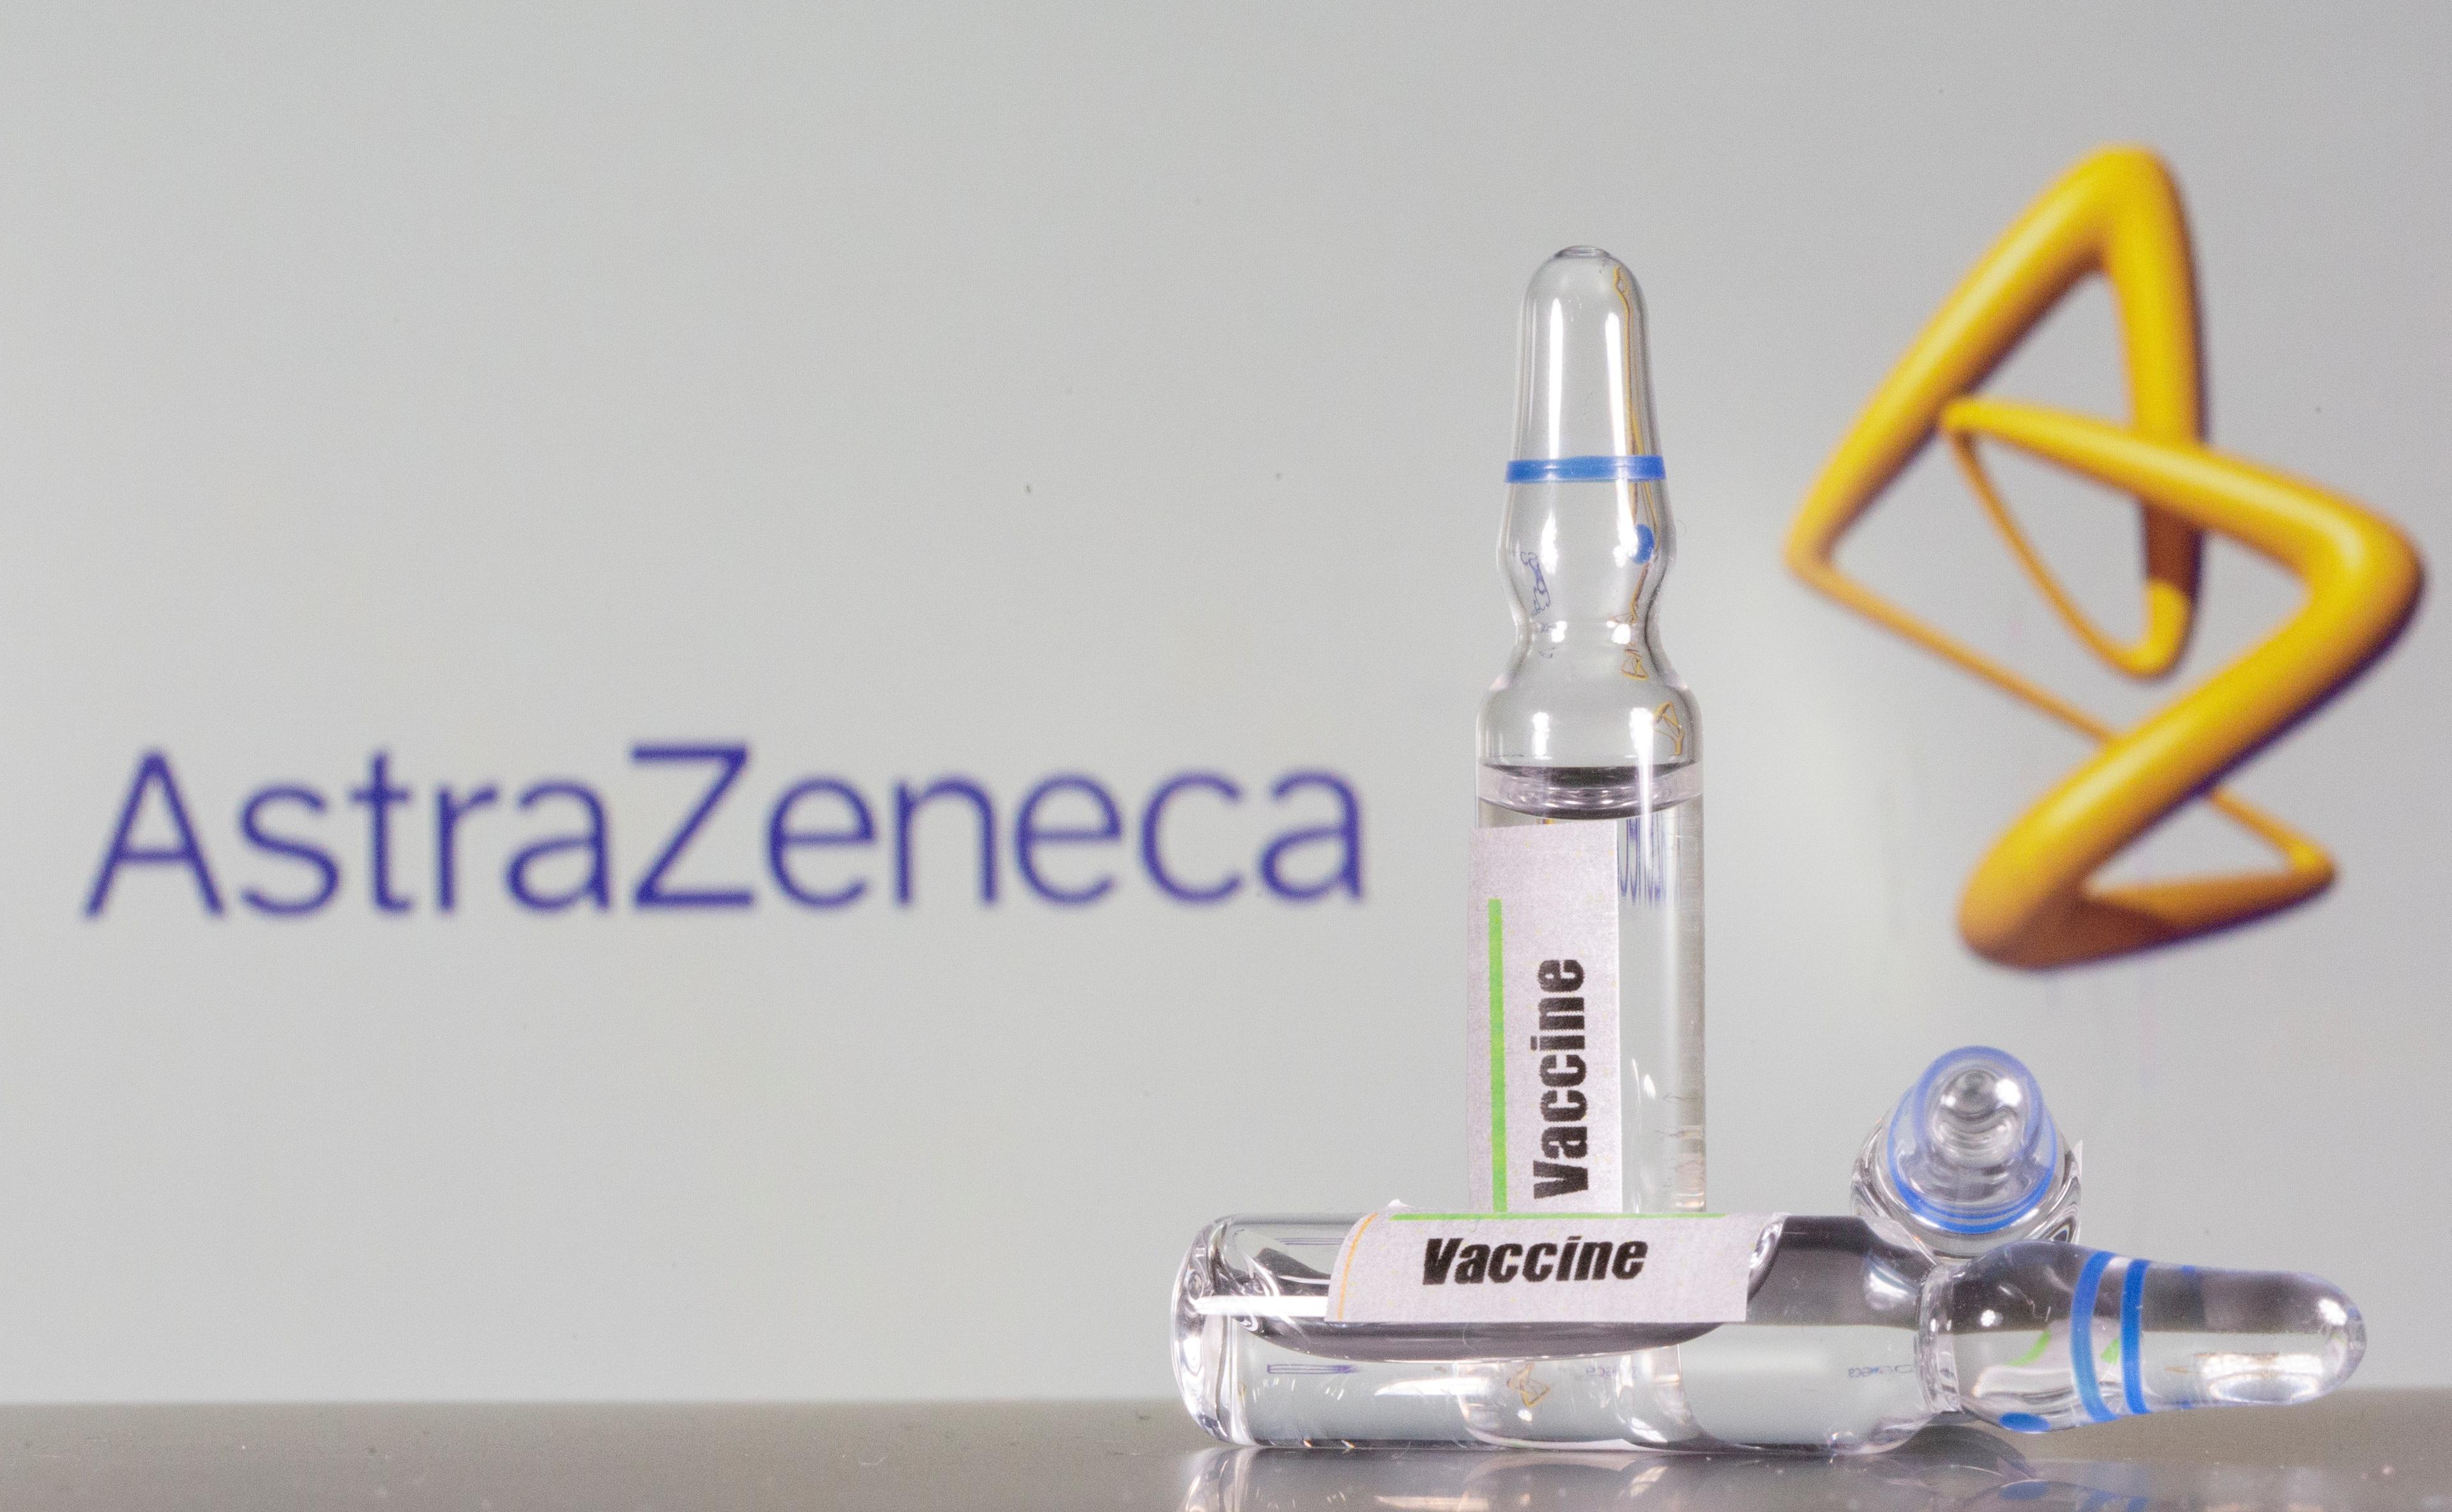 Experts of the EMA will conclude their assessment on Thursday whether blood clots are side effects of AstraZeneca vaccines or the reported cases present a coincidence - Avaz